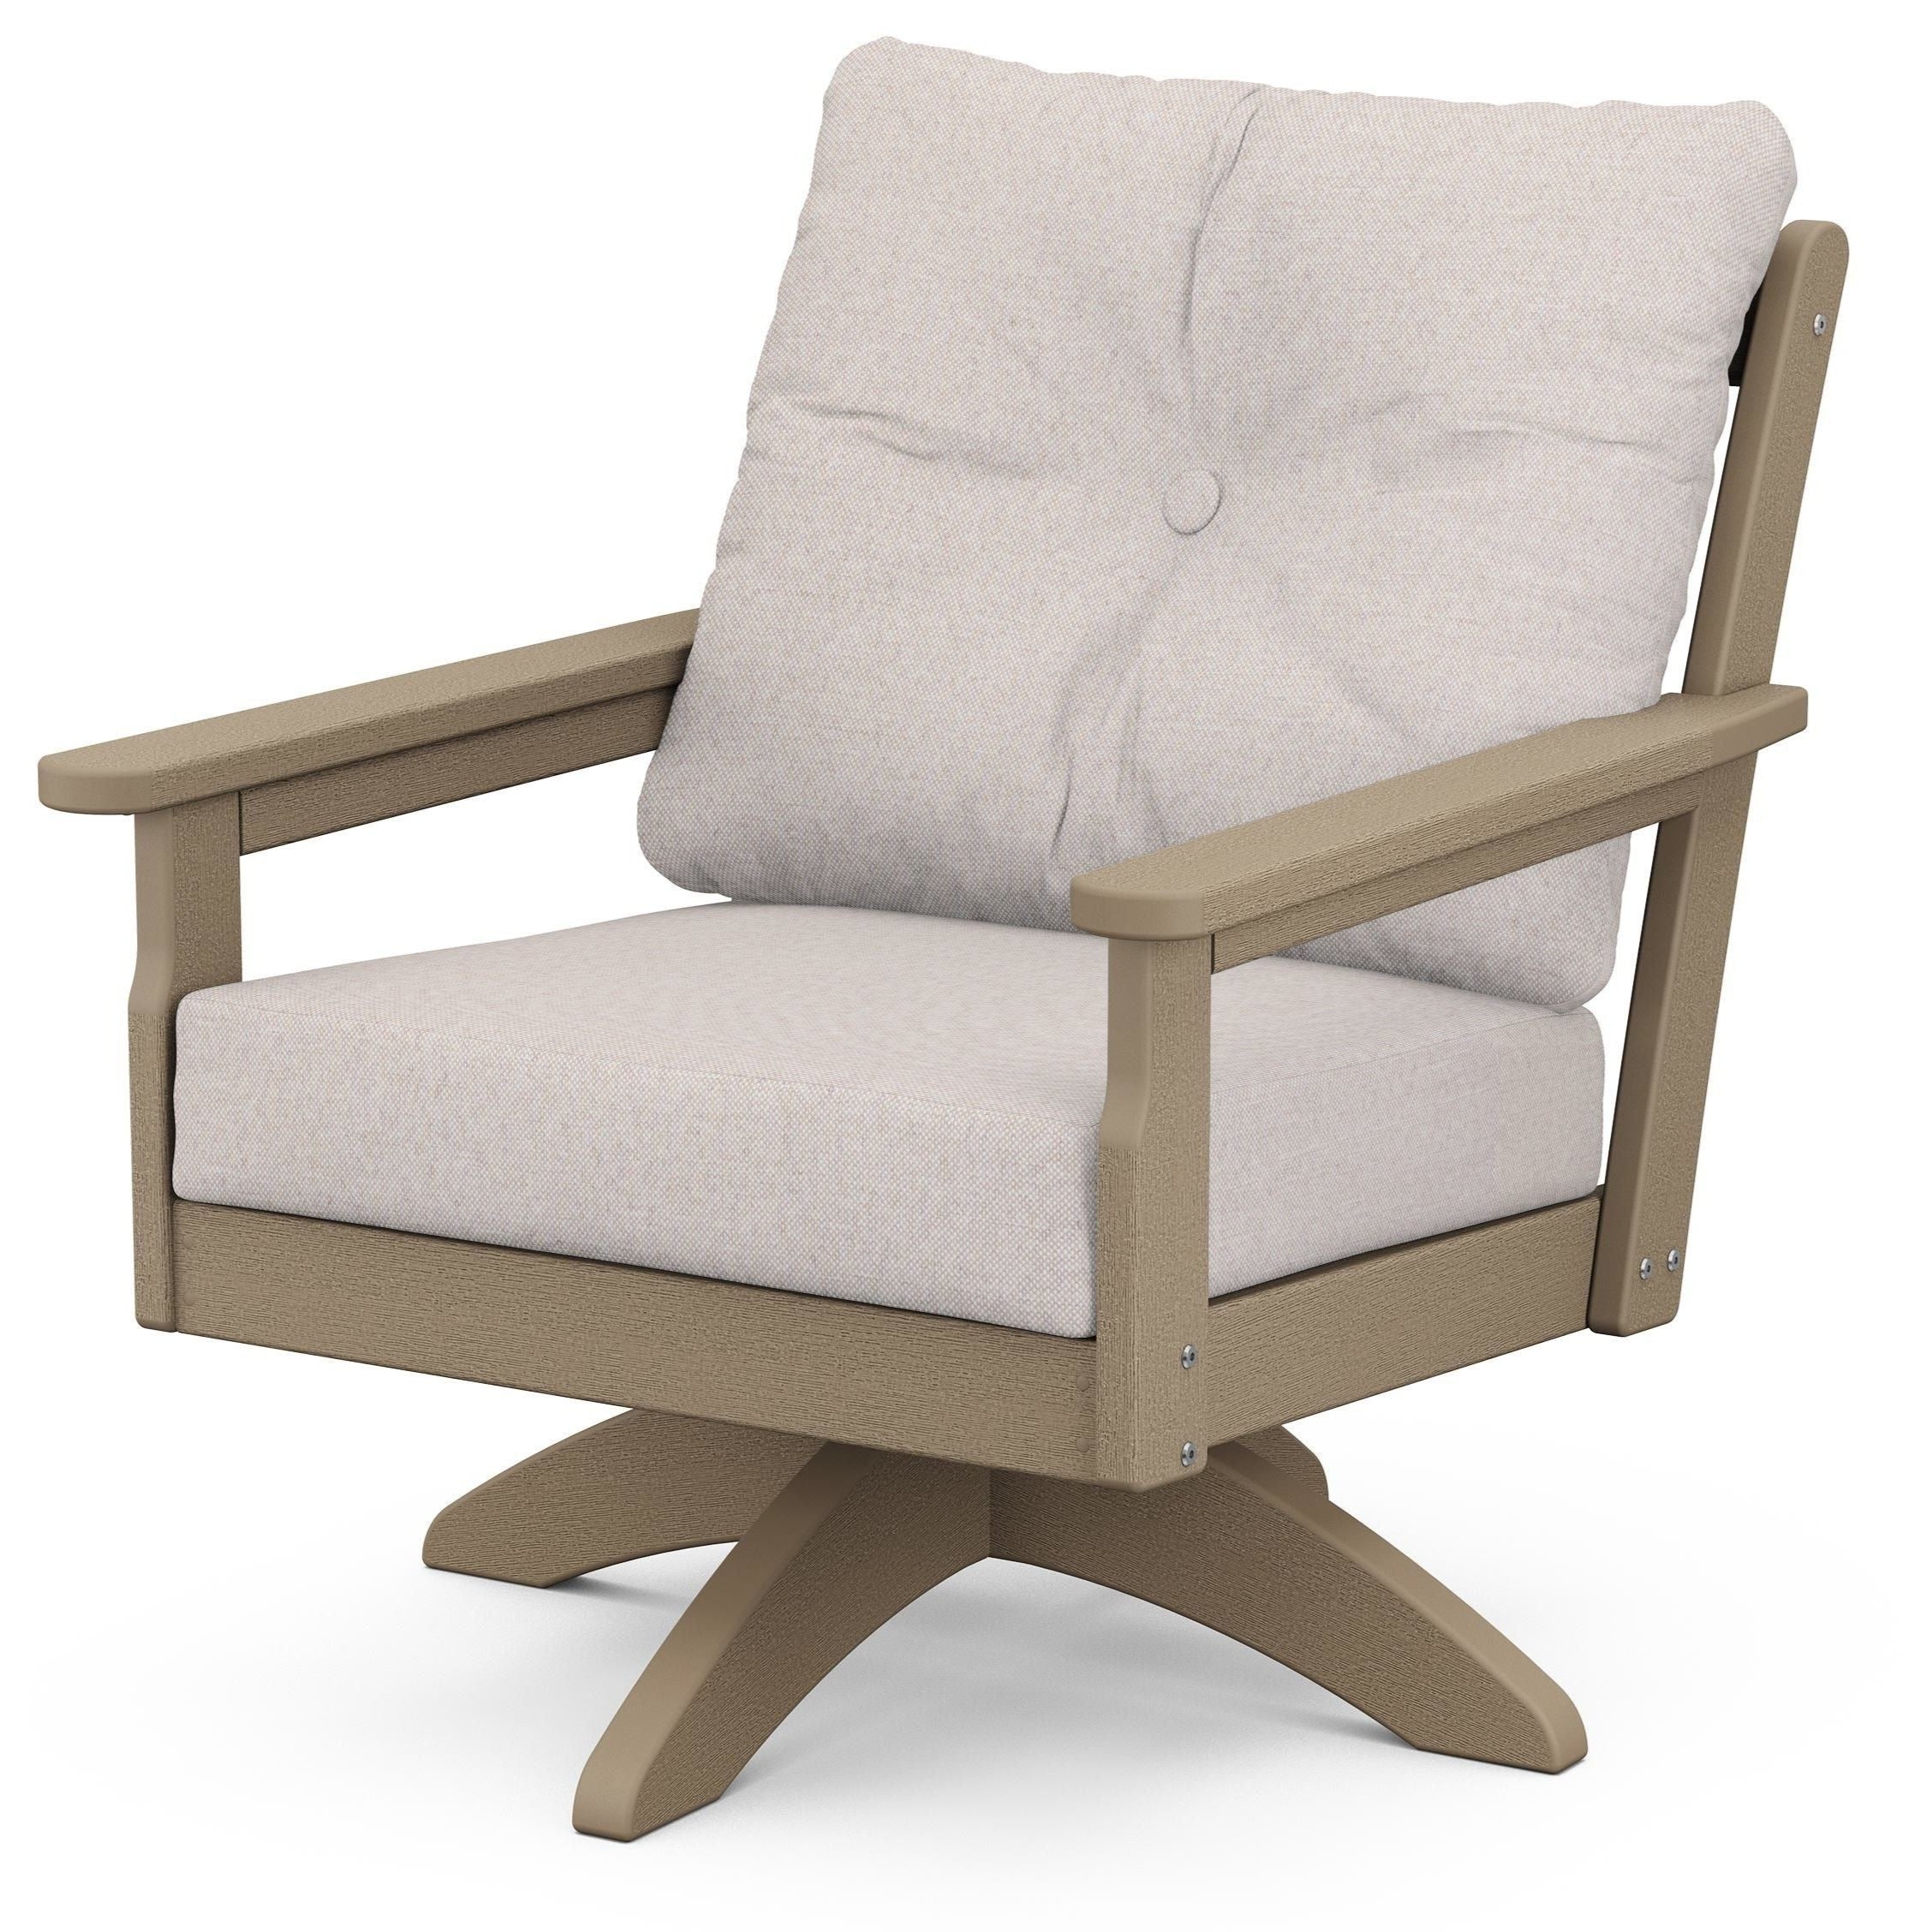 POLYWOOD Vineyard Deep Seating Swivel Chair in Vintage Sahara and Essential Sand Cushion Outdoor Chairs 12032901